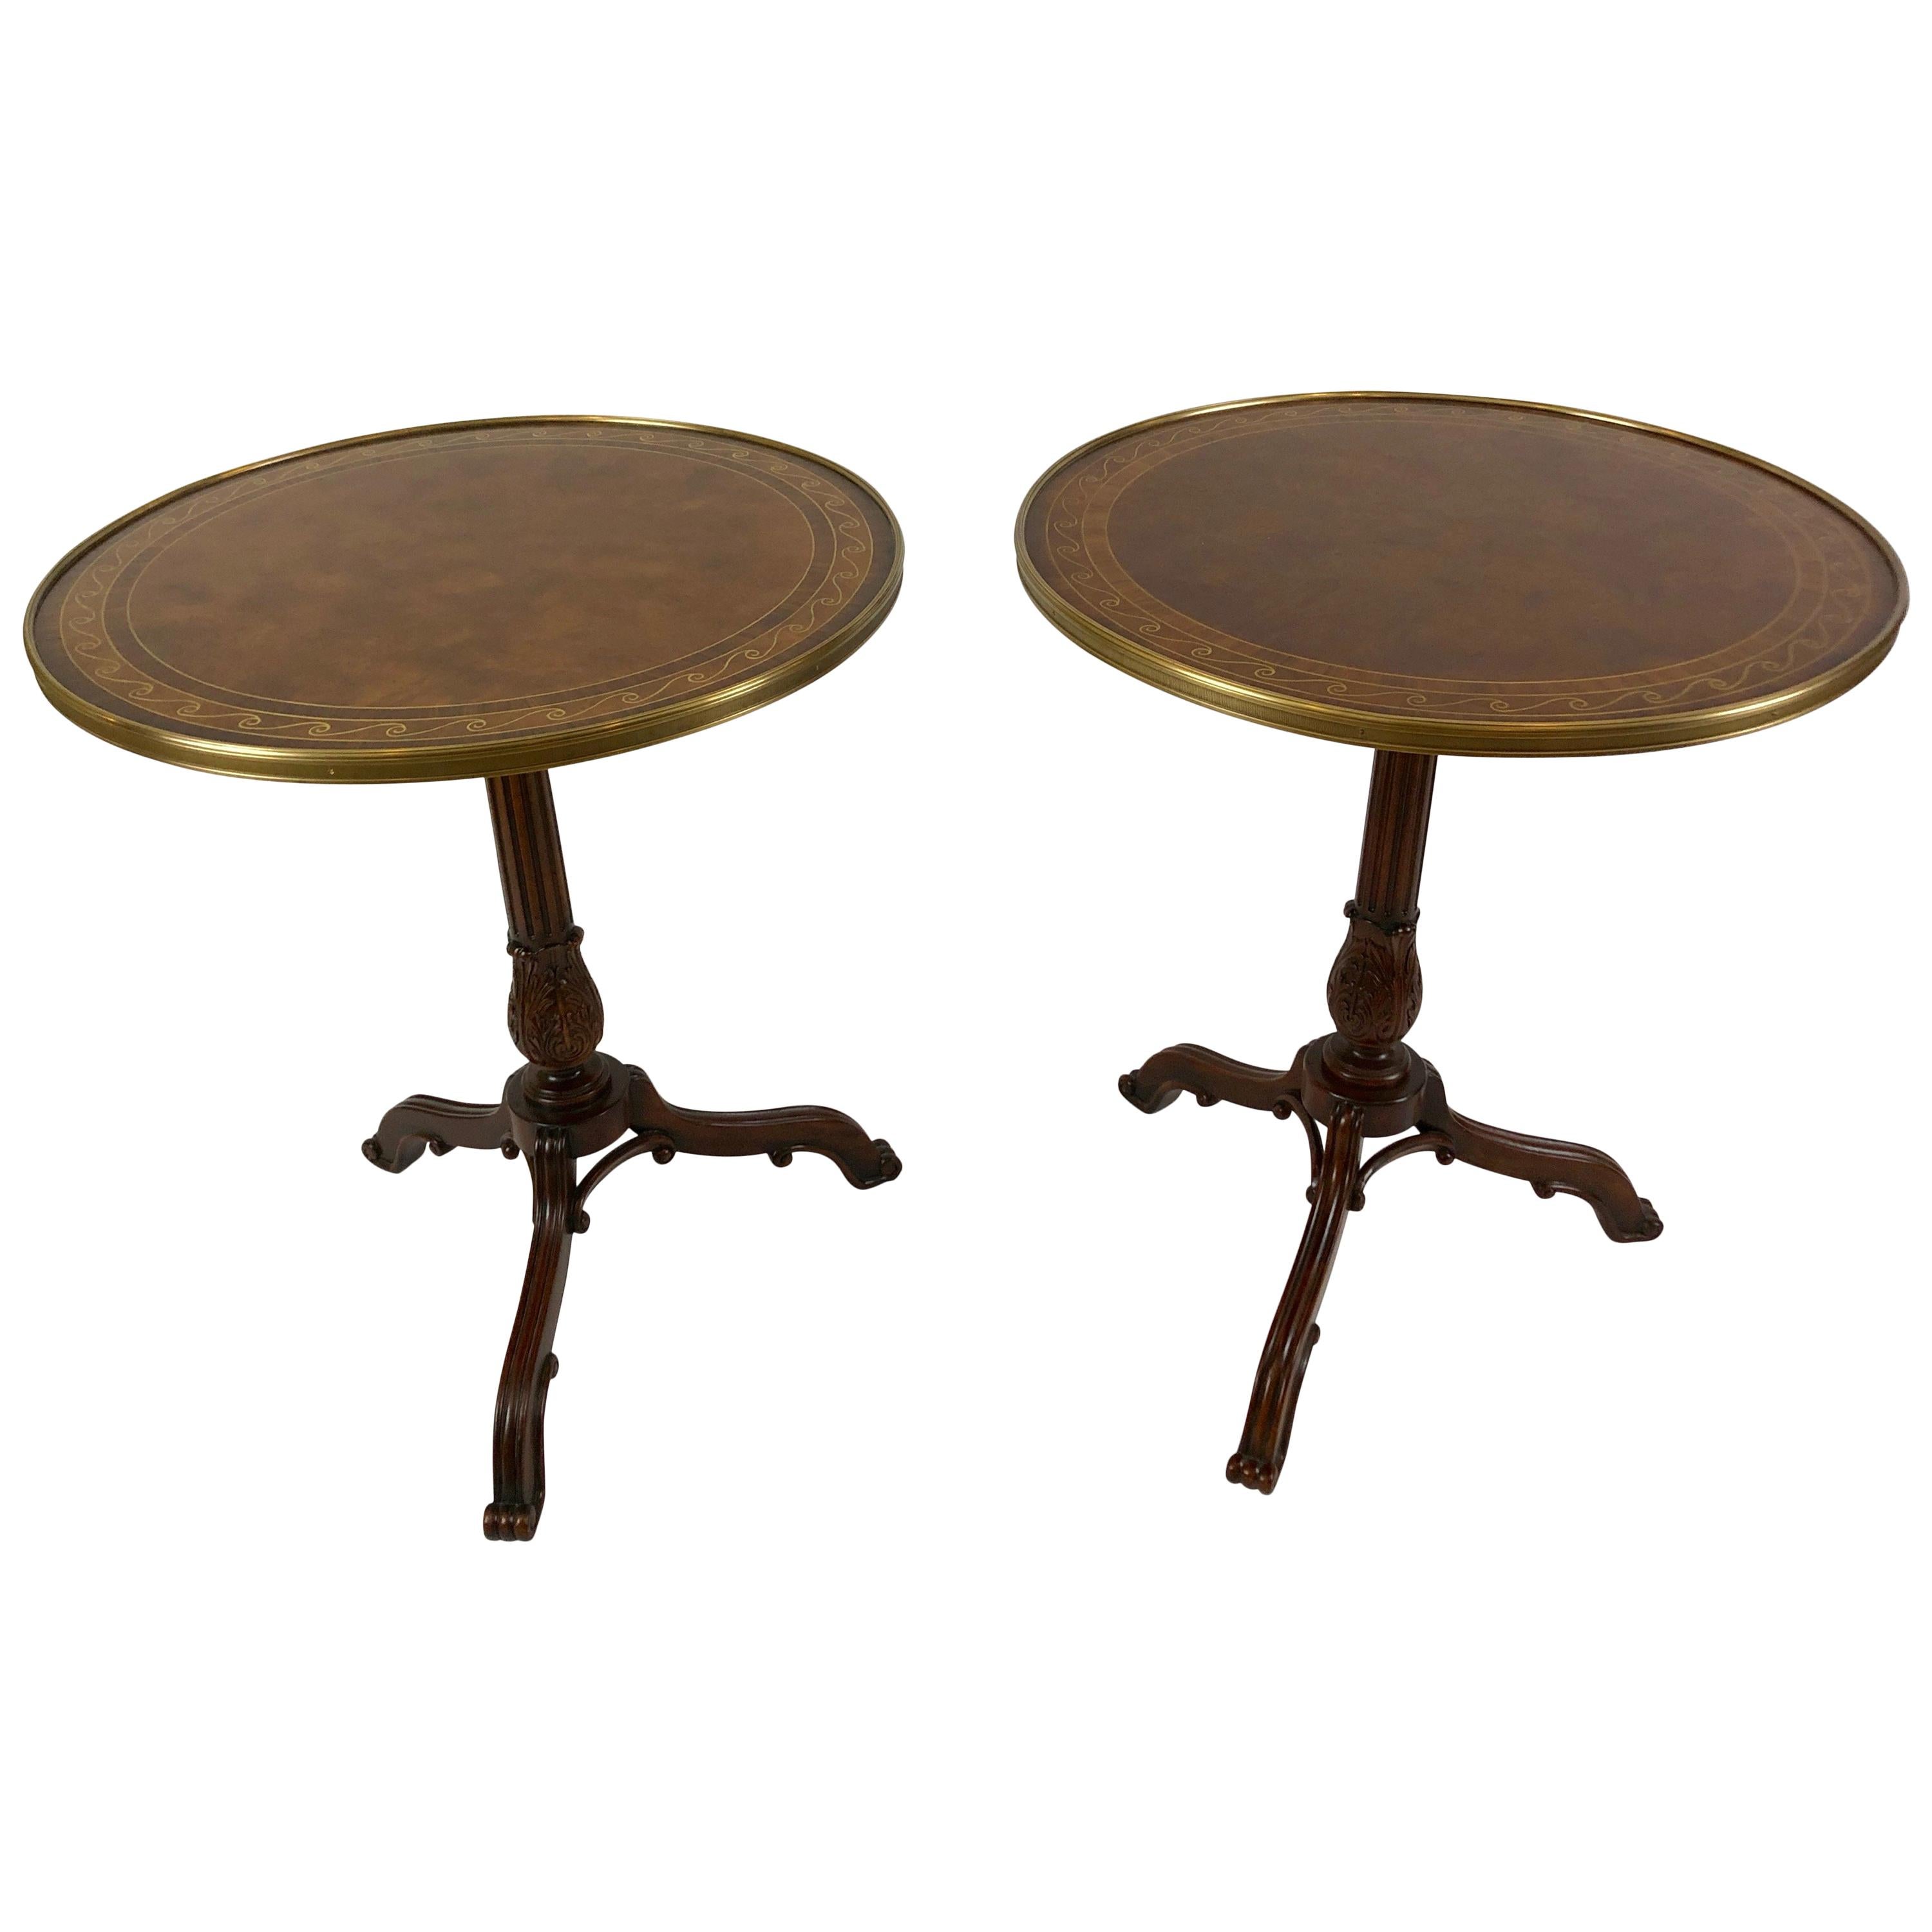 Pair of Noteworthy Theodore Alexander Burl and Zebrawood Round Side Tables